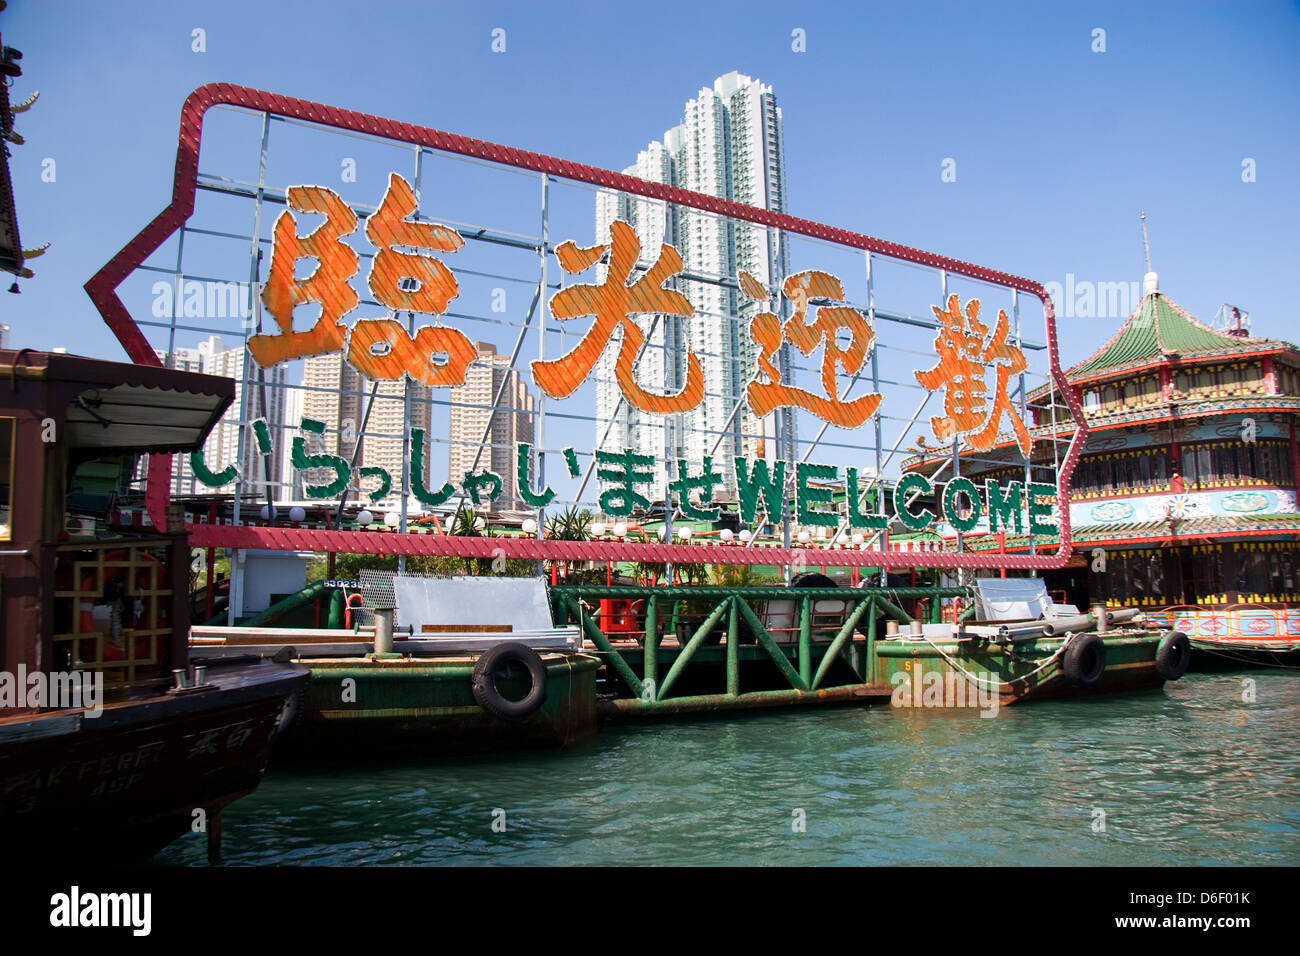 Neon Welcome sign in Aberdeen Harbour Hong Kong, China Stock Photo